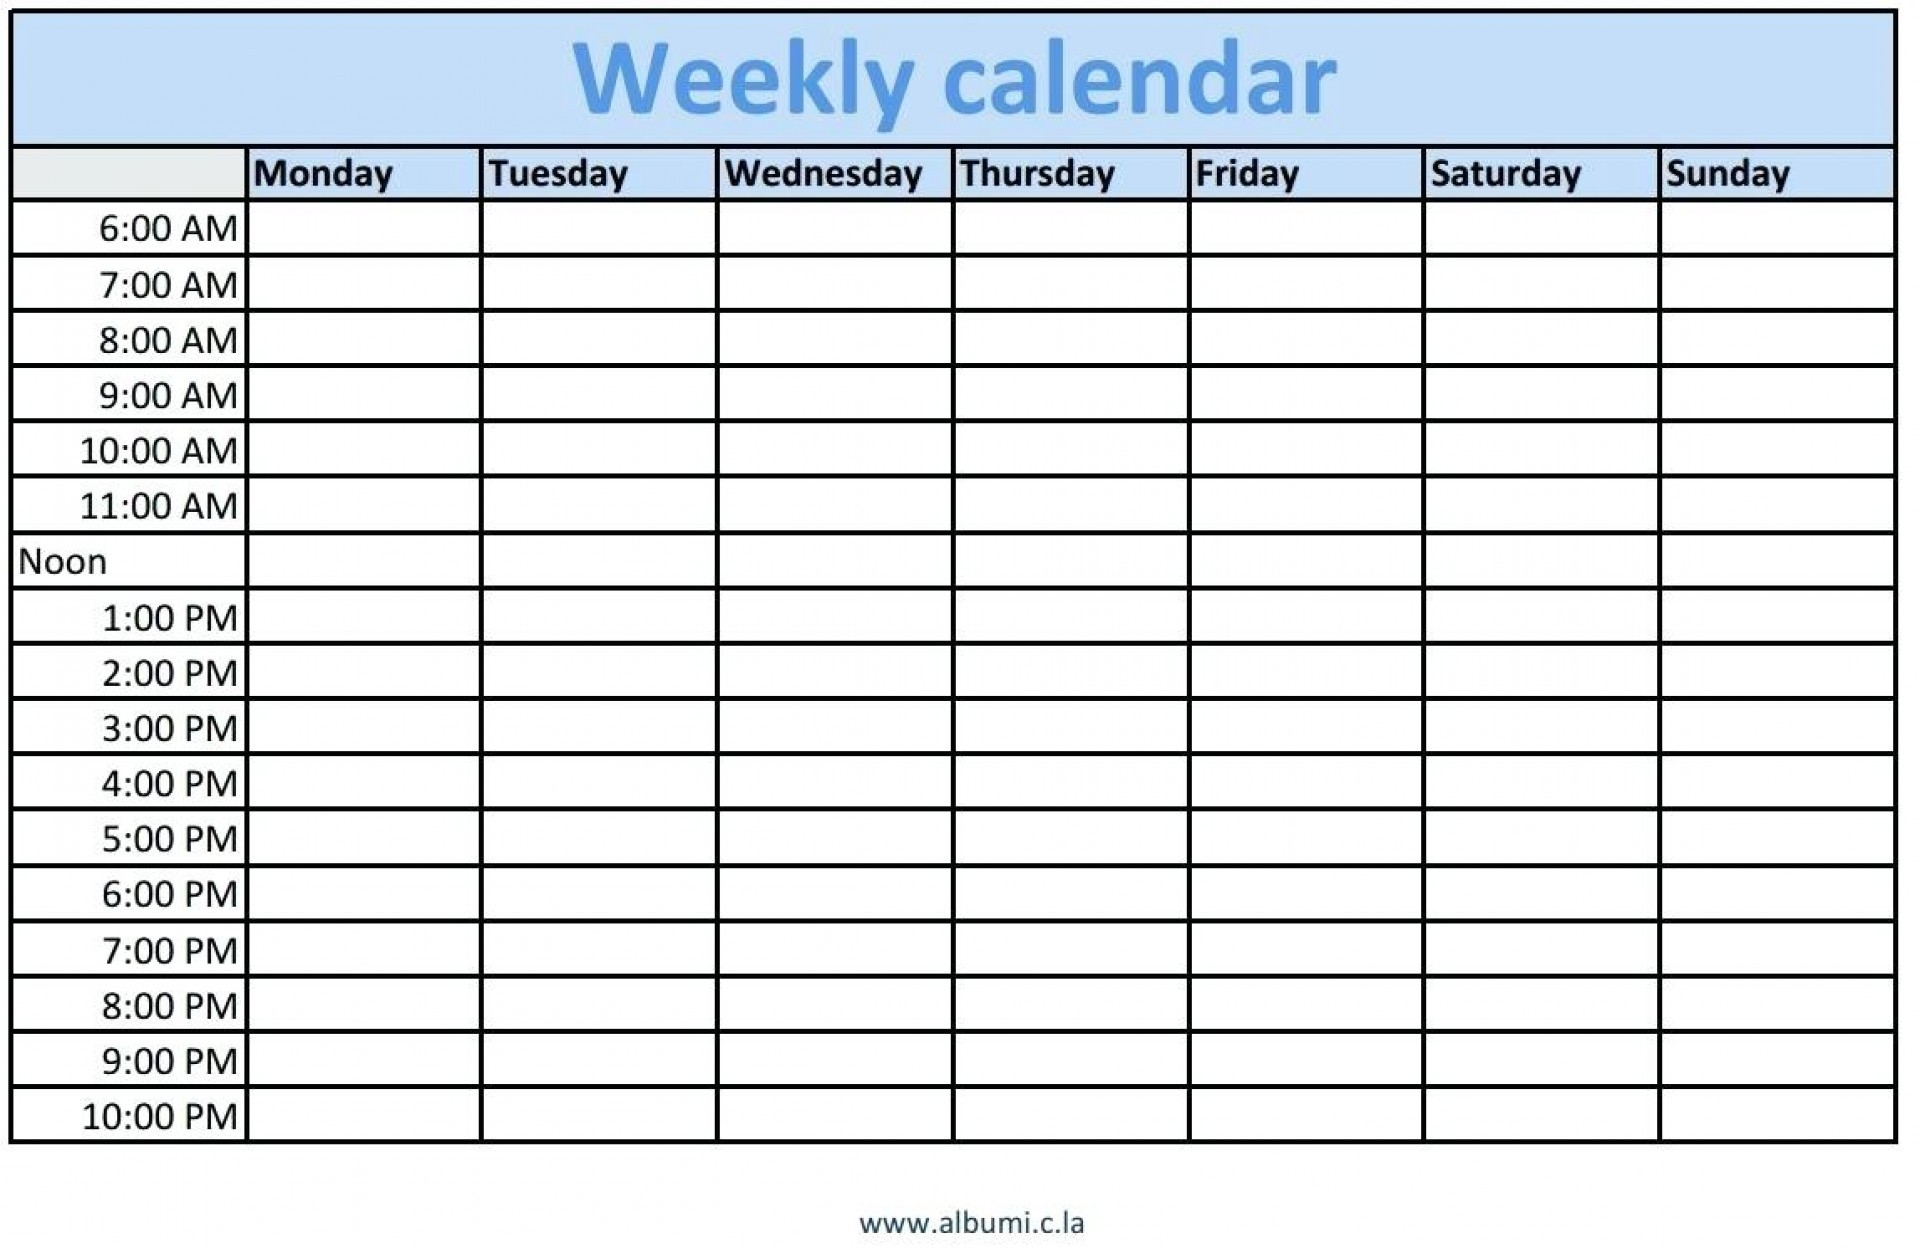 Blank Schedule Template With Time Slots | Example Calendar for Weekly Calendar With Time Slots Pdf